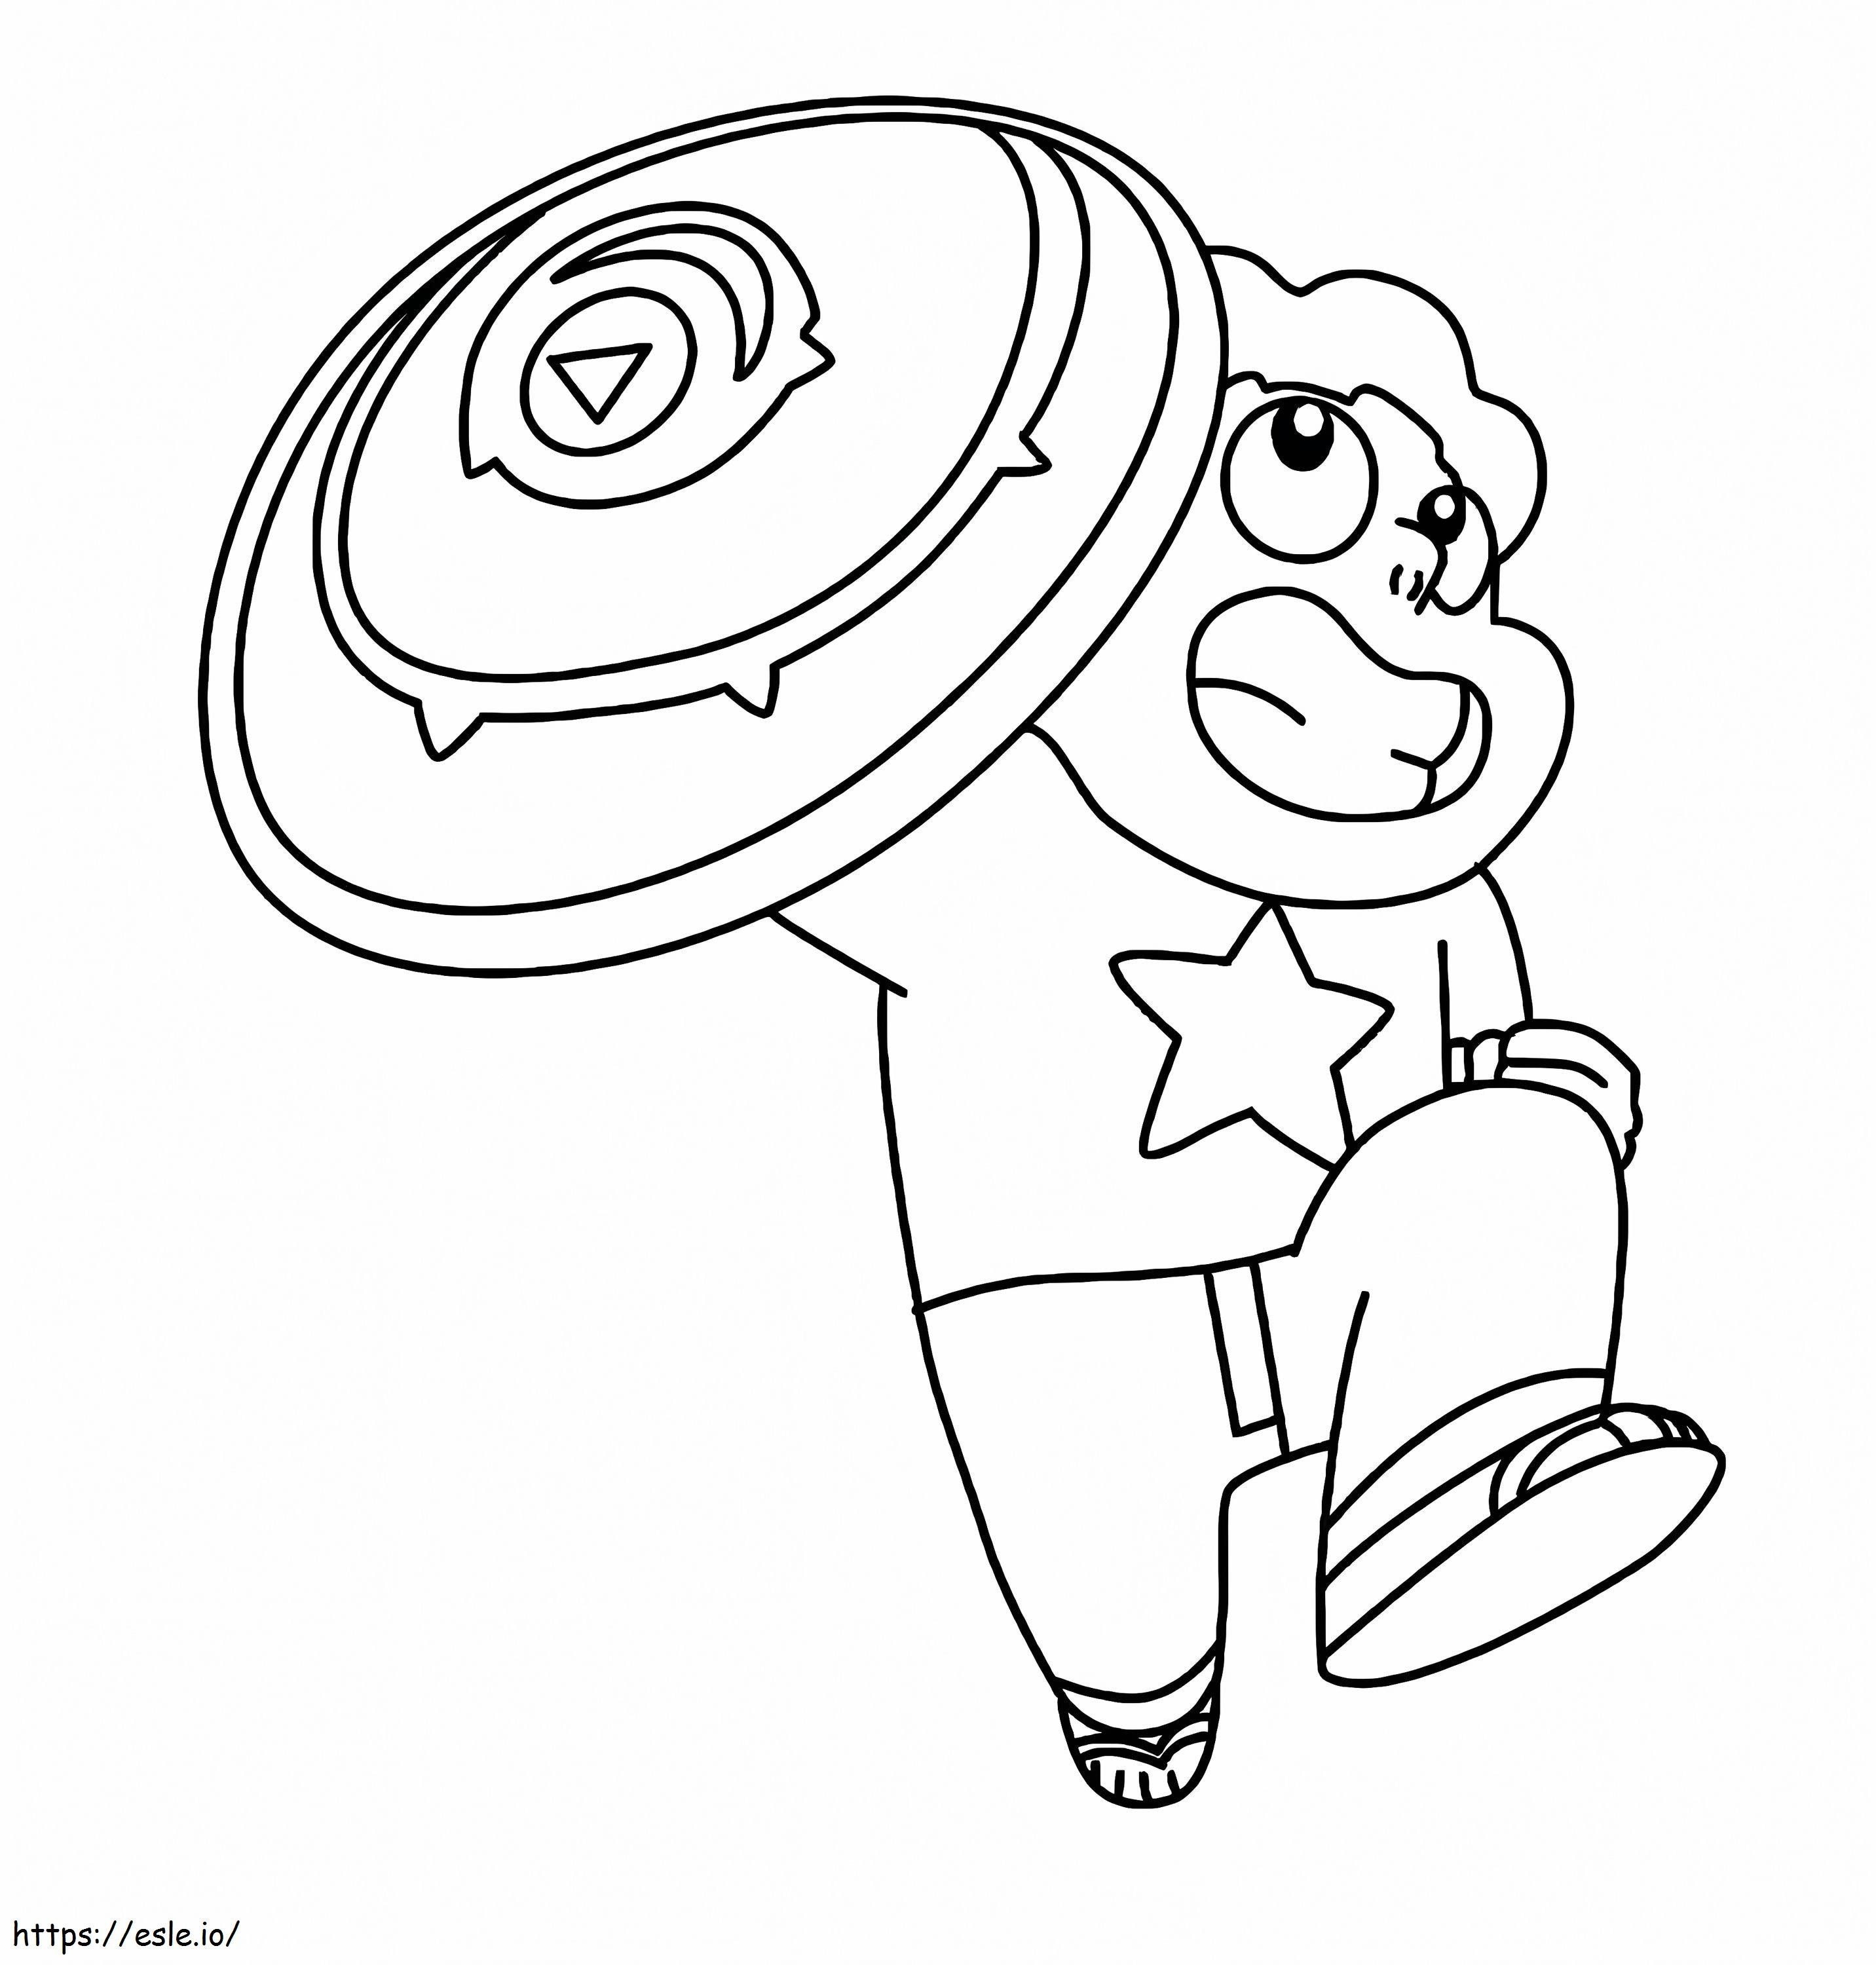 Steven Holding The Shield coloring page